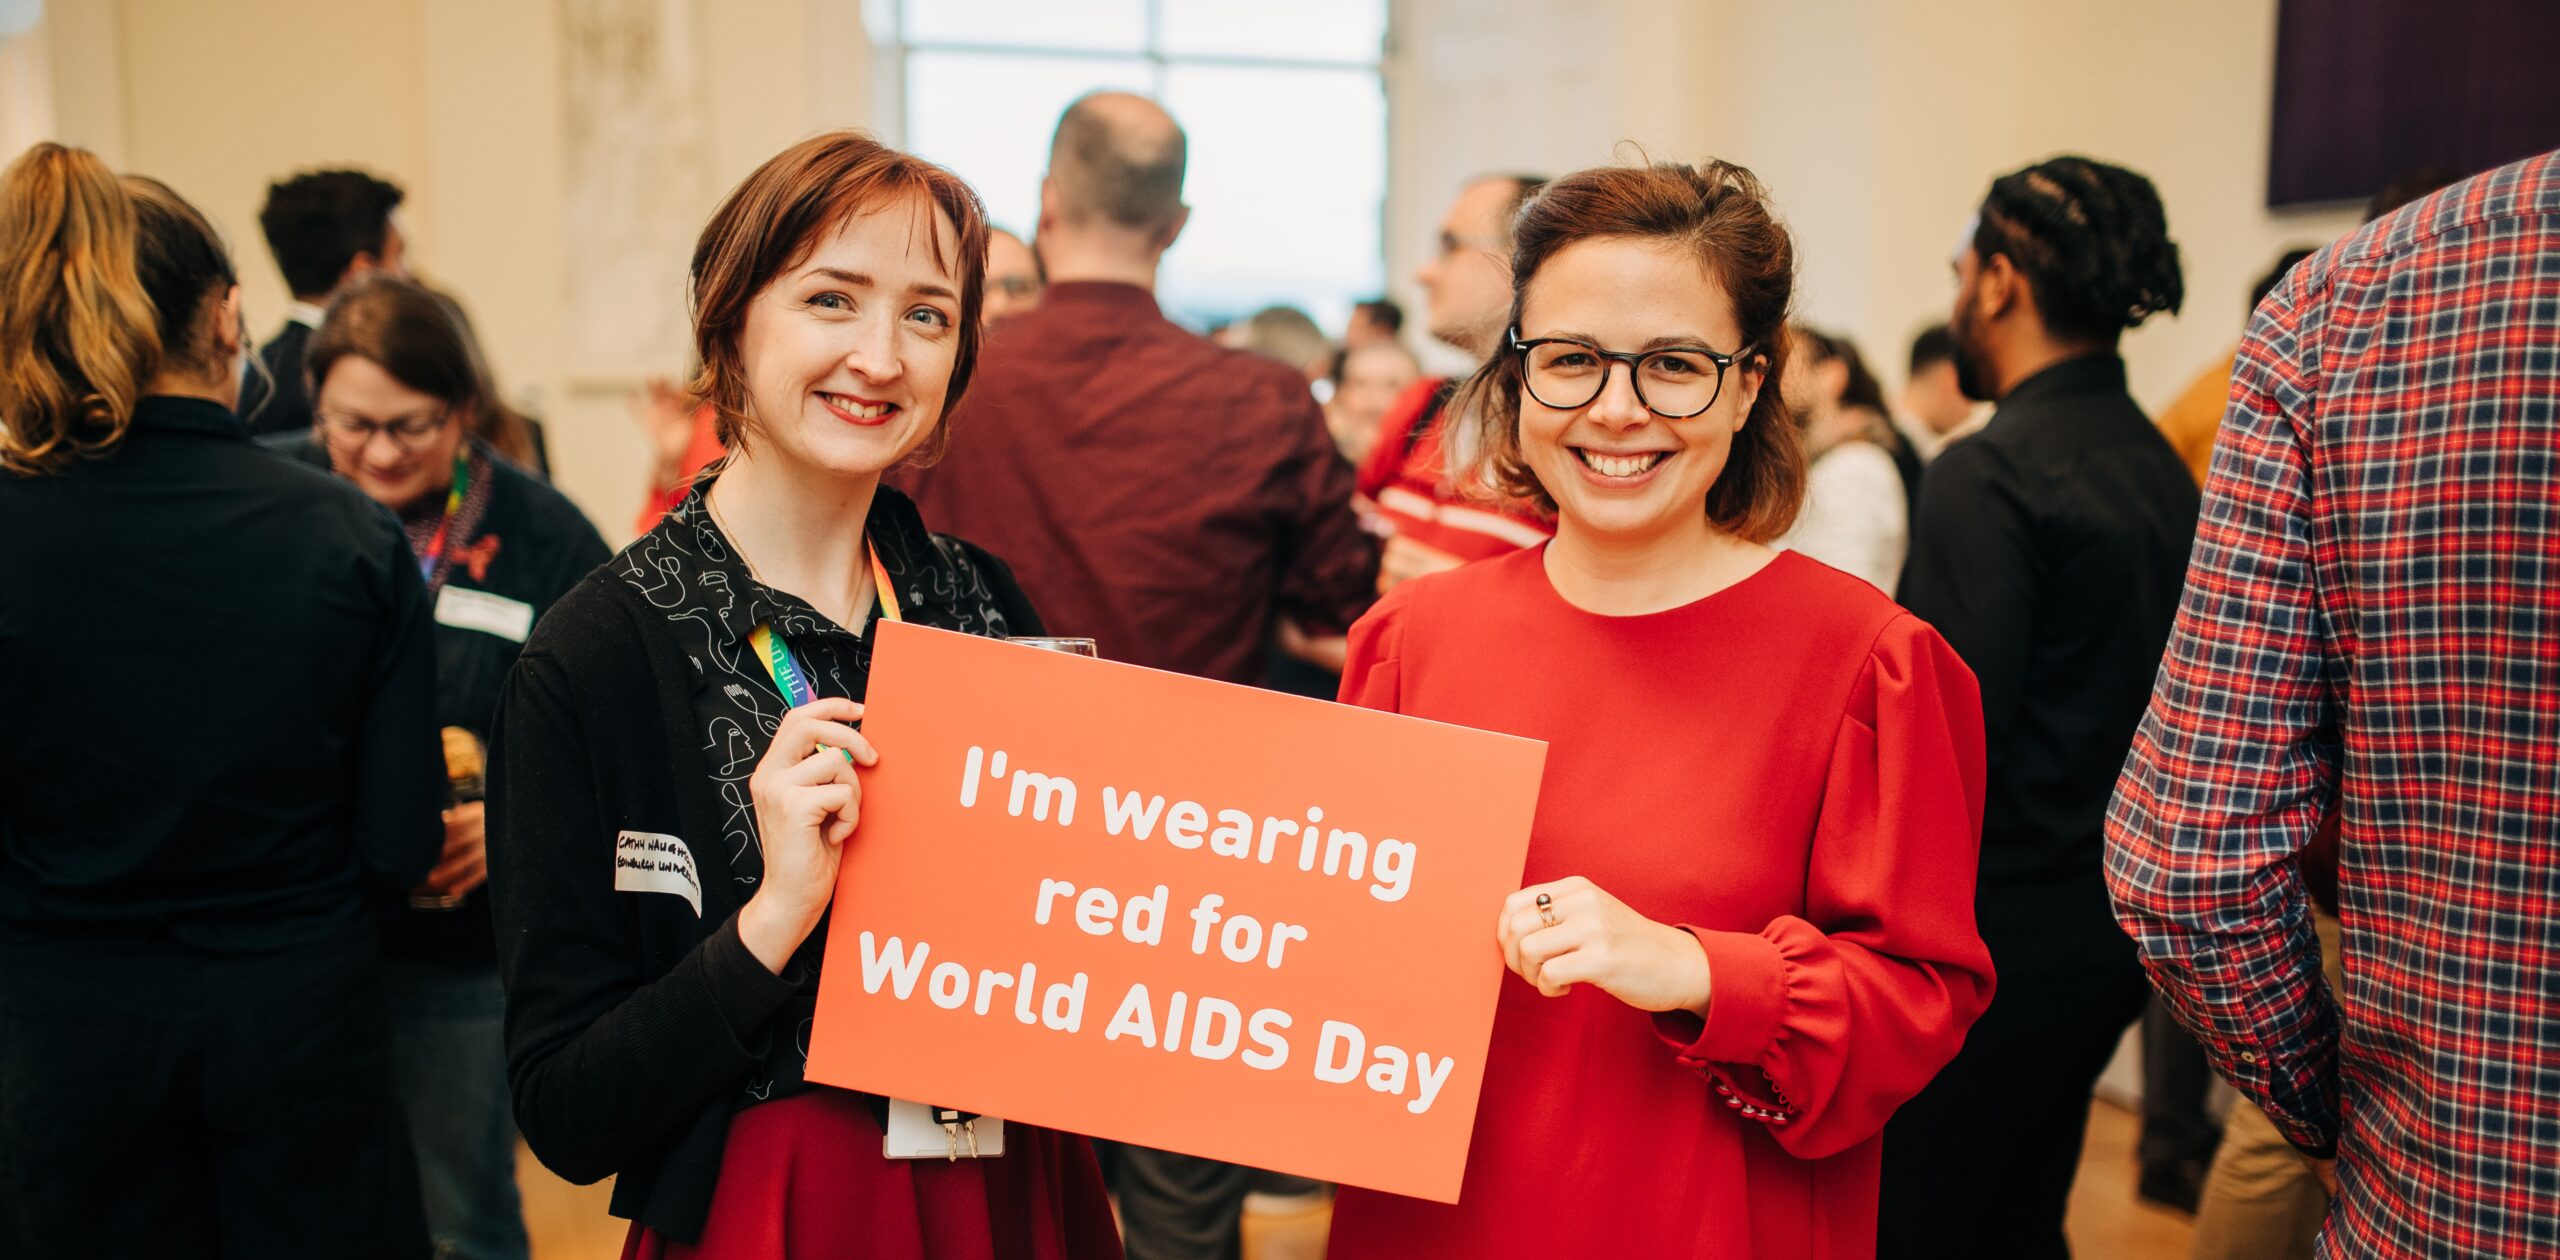 Staff Pride Network committee members at an event hosted by Waverley Care, holding a sign that reads "I'm wearing red for World Aids Day"